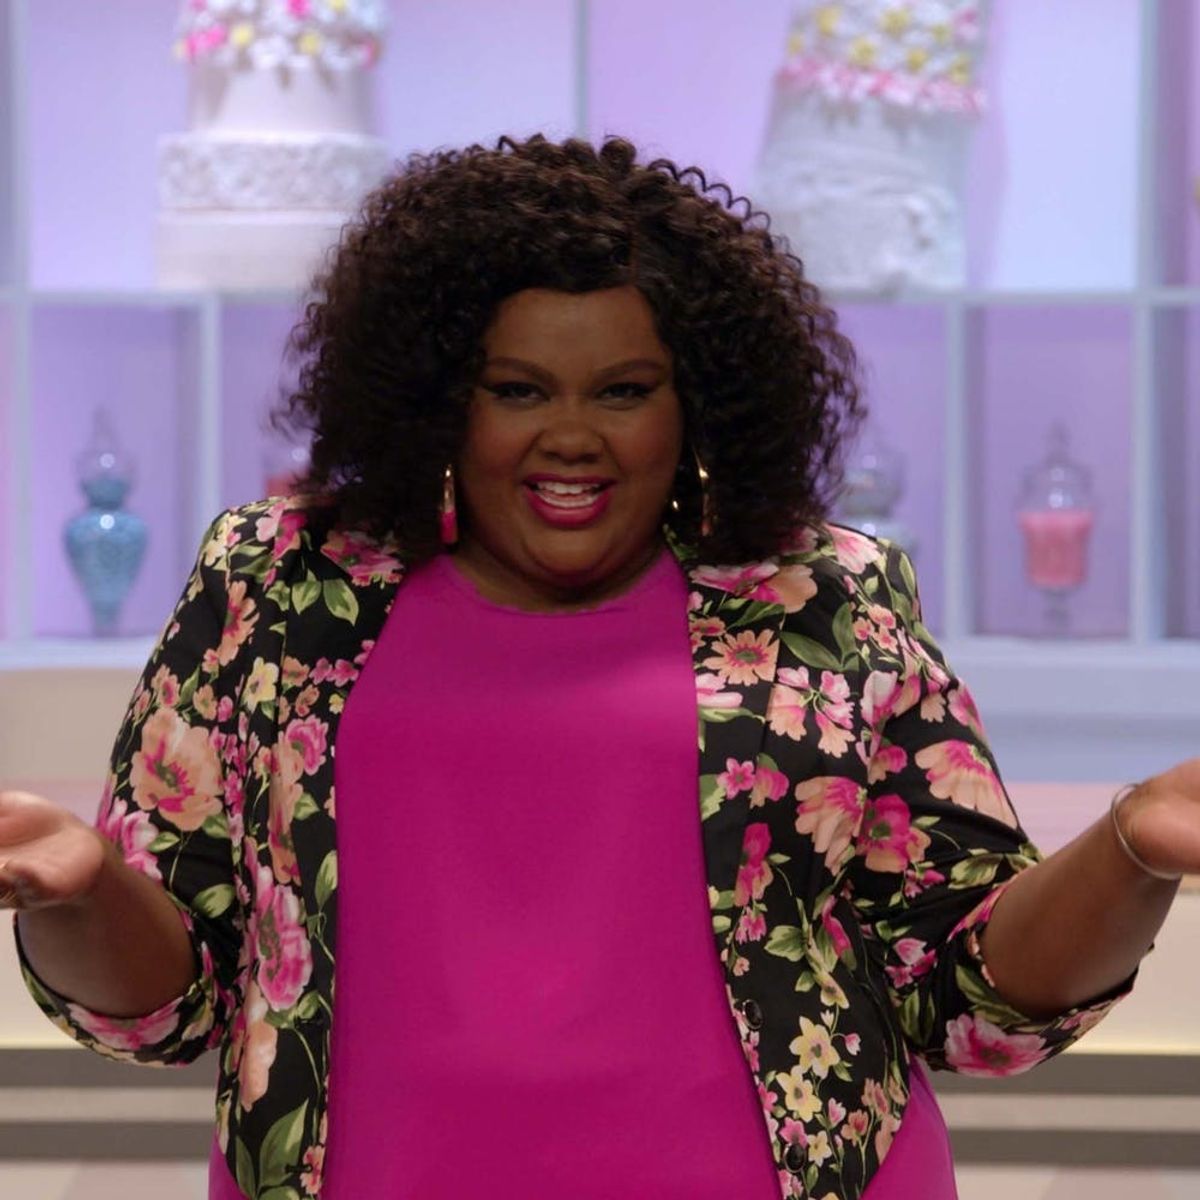 Netflix’s ‘Nailed It!’ Just Gave Us an Early Holiday Gift